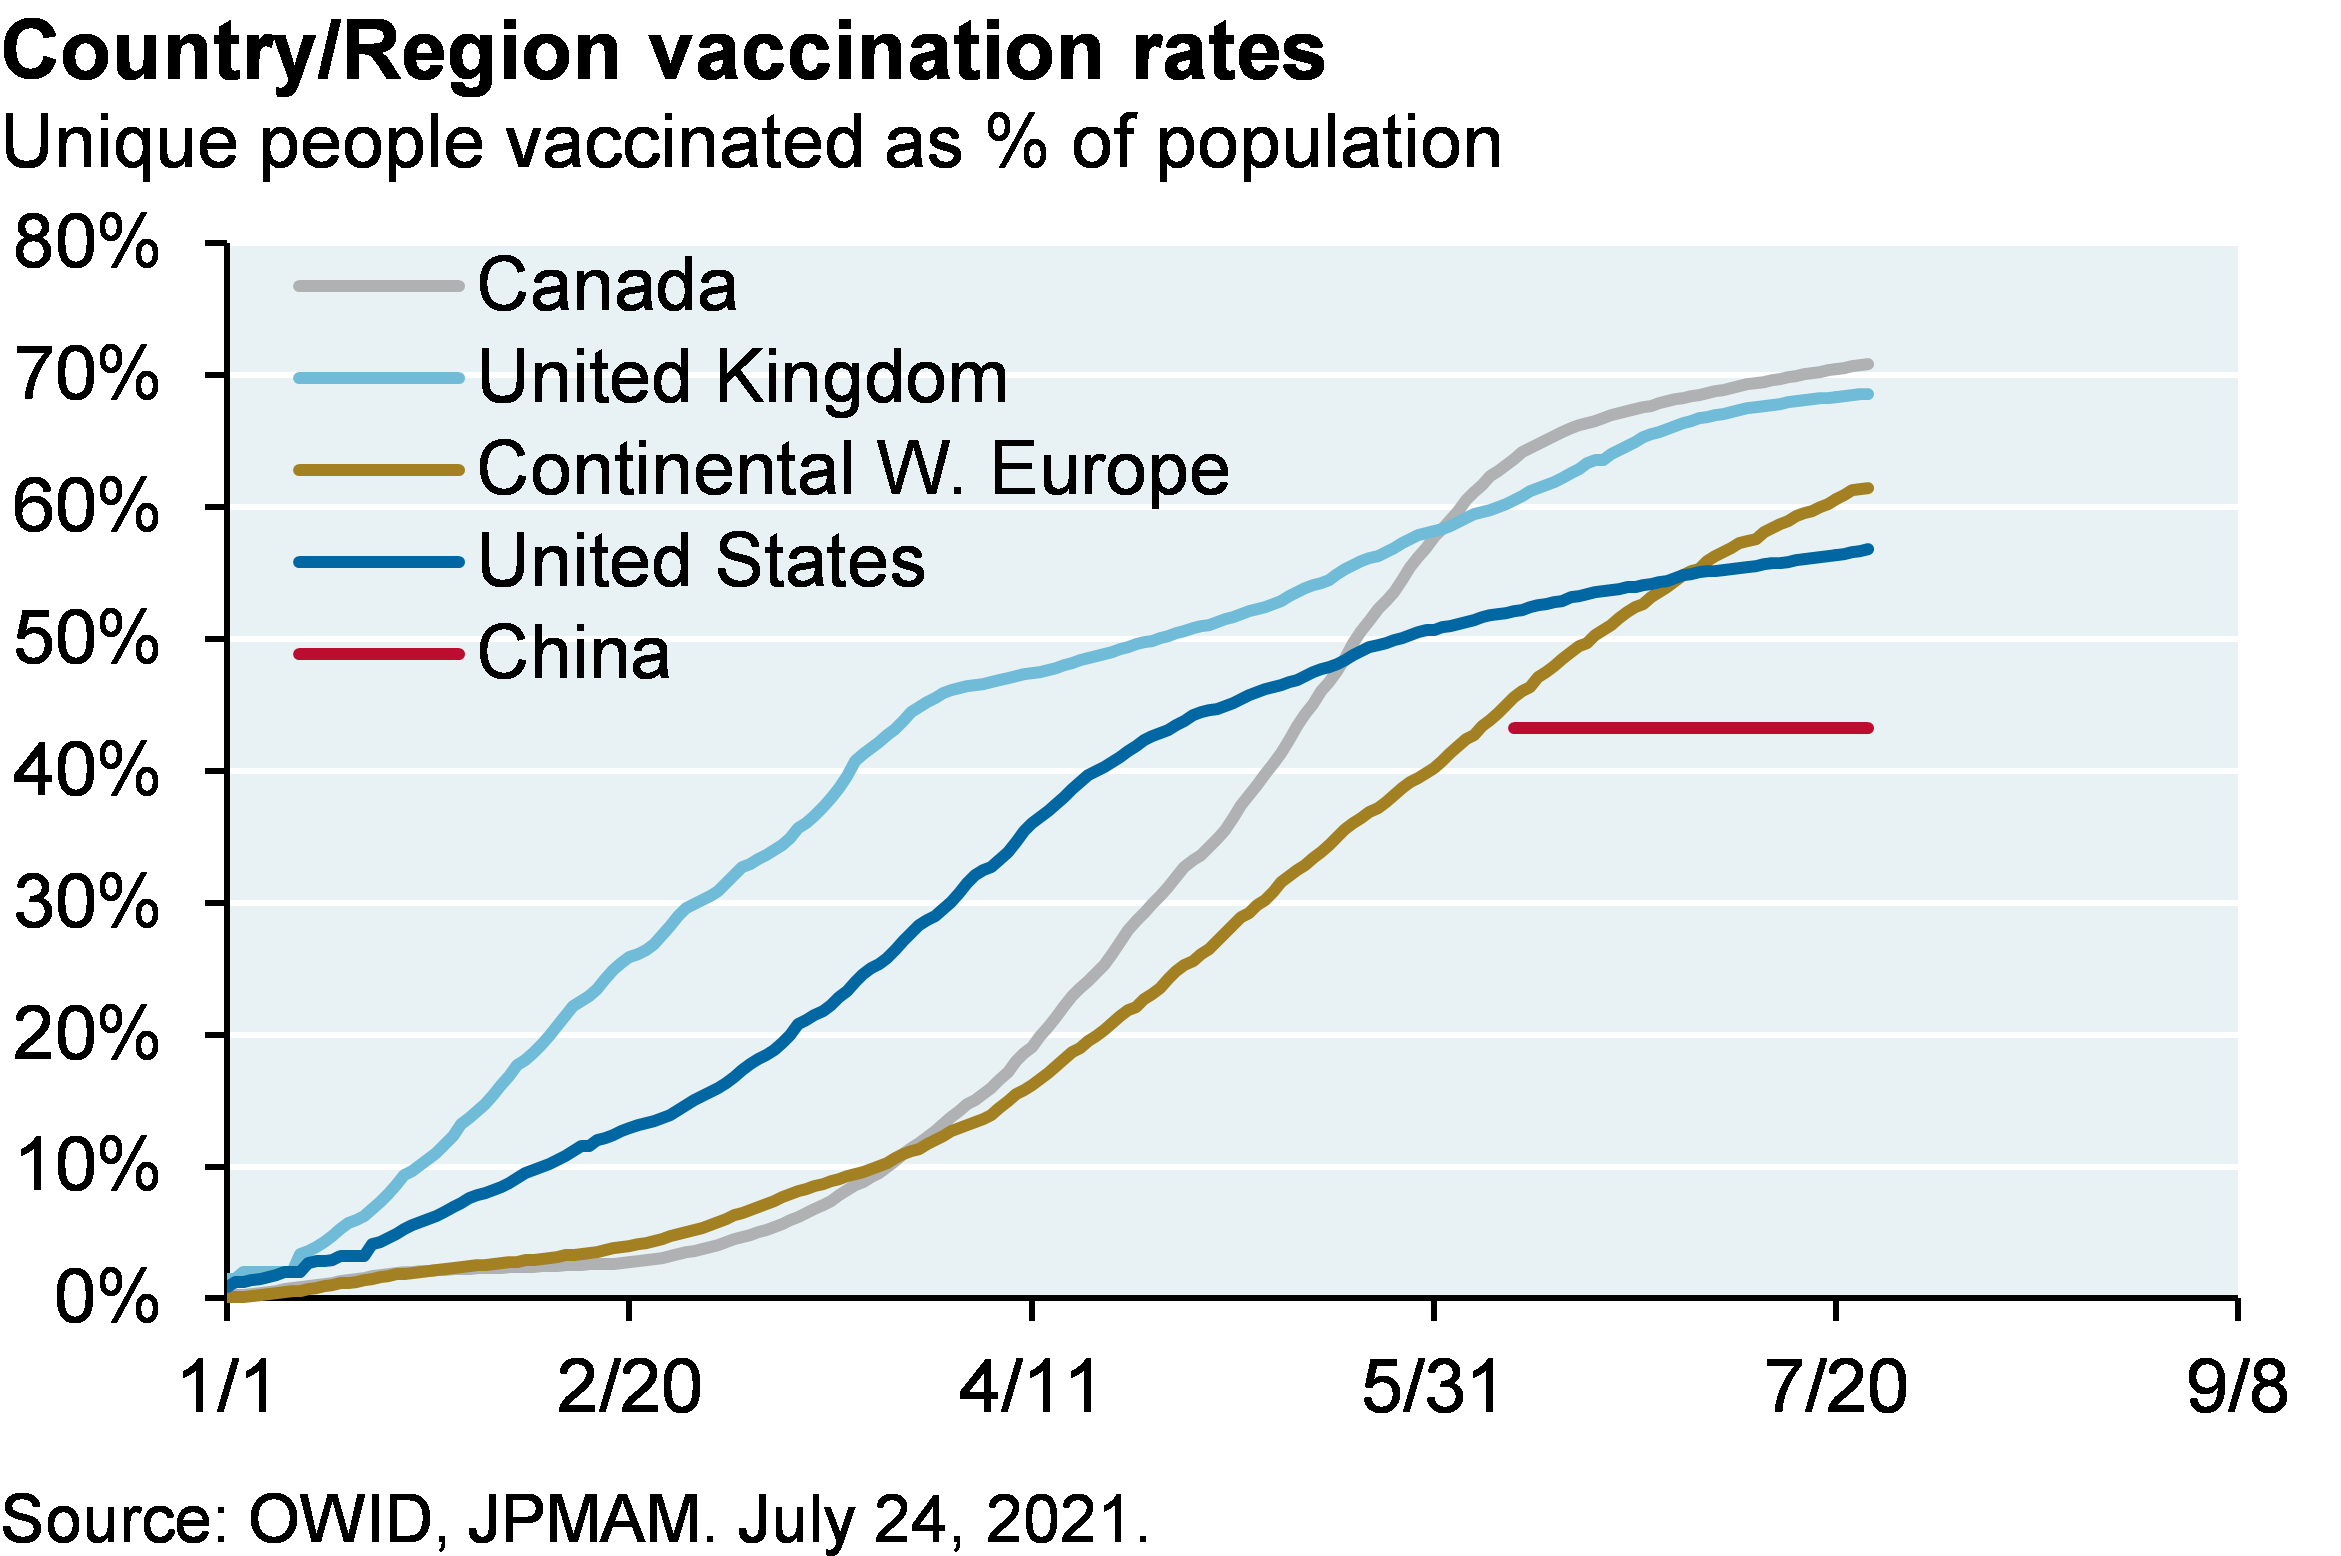 Line chart shows country/region vaccination rates for Canada, United Kingdom, Continental Western Europe, United States and China since January 2021, shown as unique people vaccinated as % of population. At their most recent point, Canada has the highest percentage of people vaccinated at around 70%, closely followed by the United Kingdom. Continental Western Europe‚Äôs vaccination rate is just over 60% followed by the United States at 57%. China‚Äôs vaccination rate is just above 40%. 